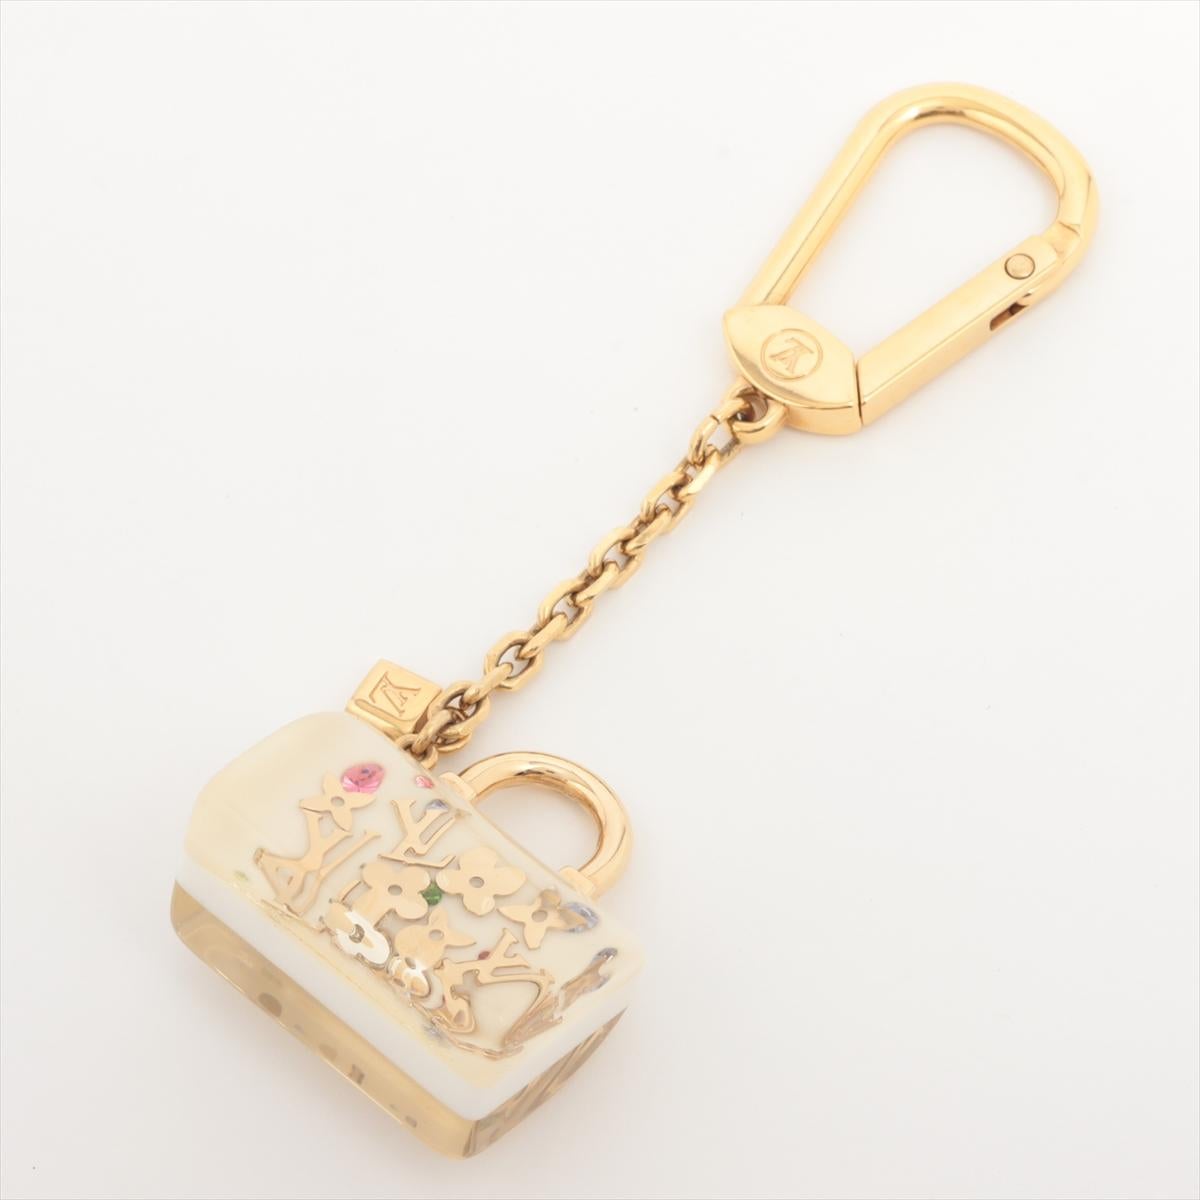 The Louis Vuitton Speedy Bag Inclusion Keychain in White is a charming and stylish accessory that pays homage to the iconic Speedy bag. Crafted from durable resin, the keychain features a miniature replica of the beloved Speedy bag, complete with